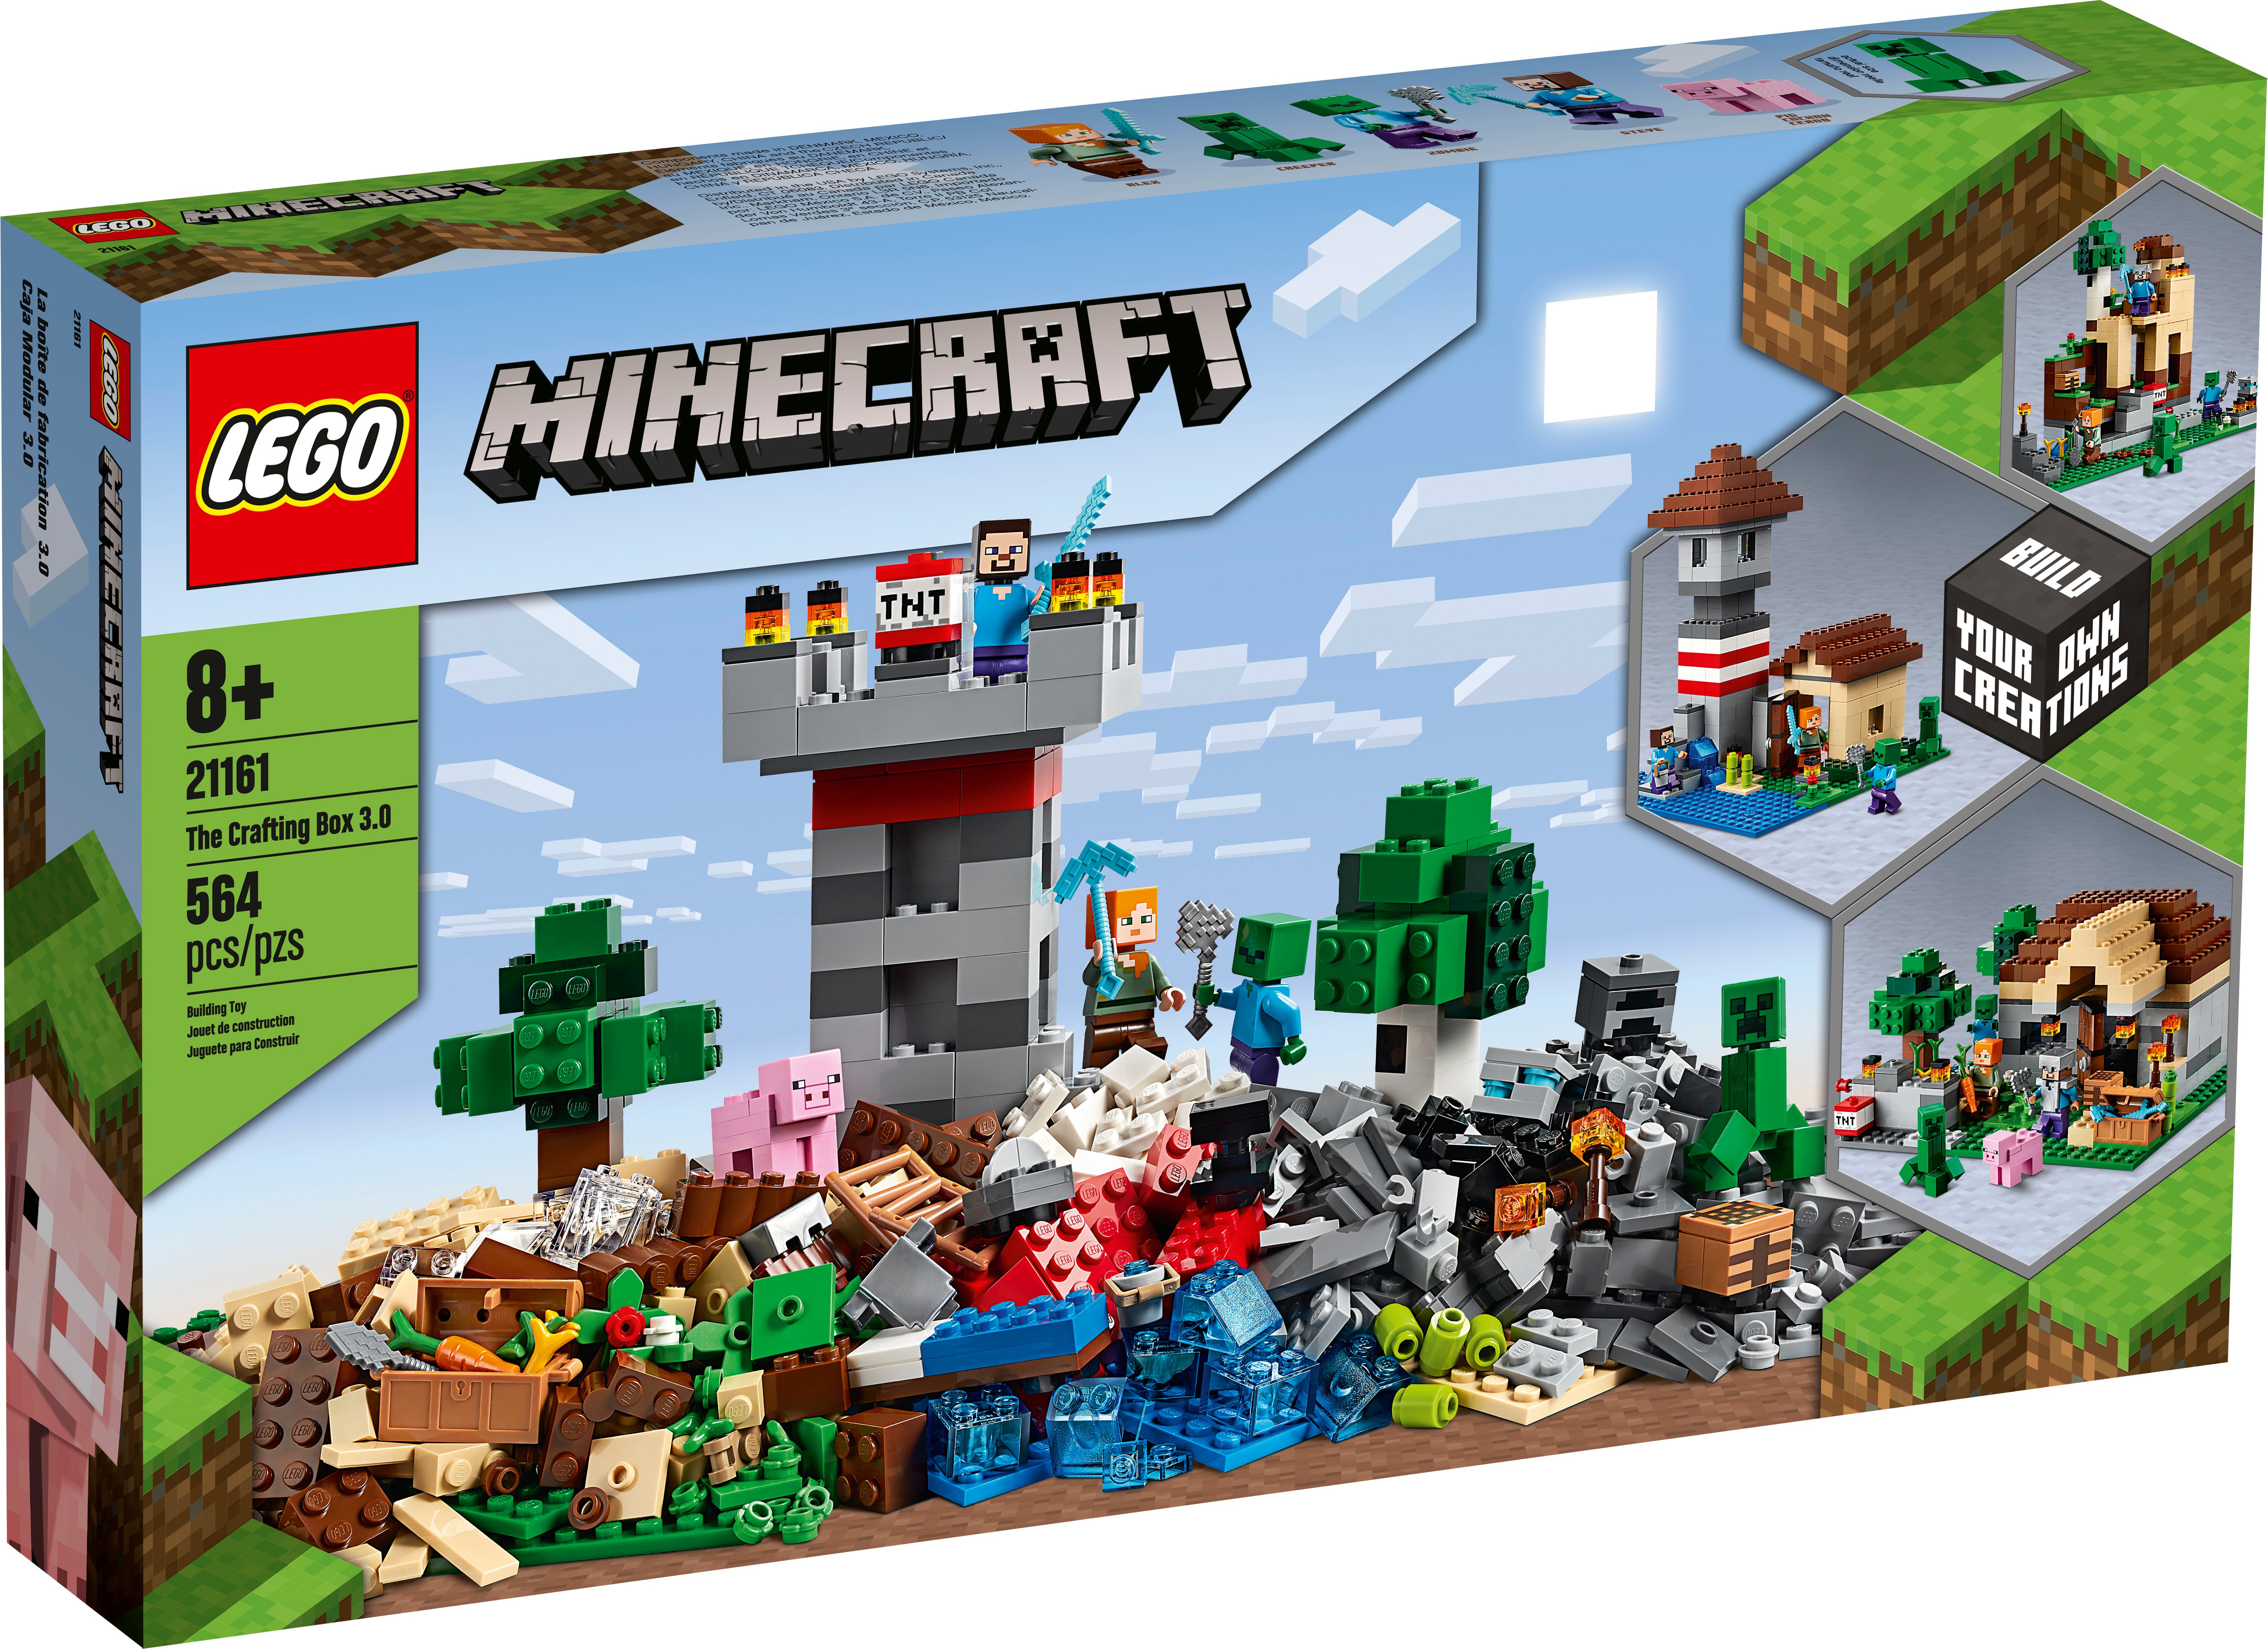 LEGO The Crafting Box 3.0 Minecraft 21161 BOX IS OPEN & DISTRESSED ALL NEW